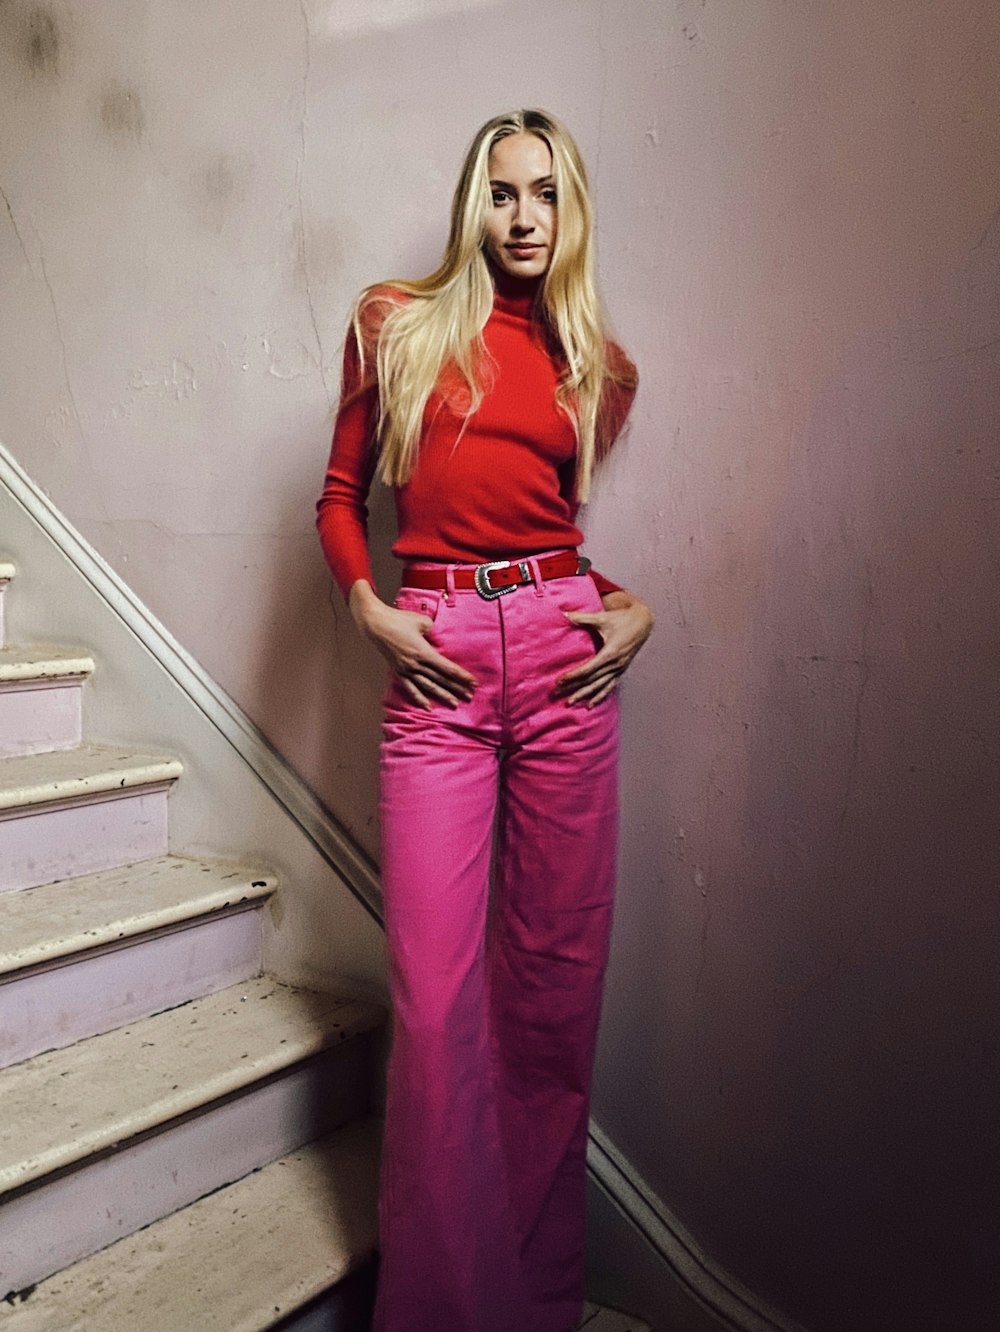 a woman in a red top and pink pants